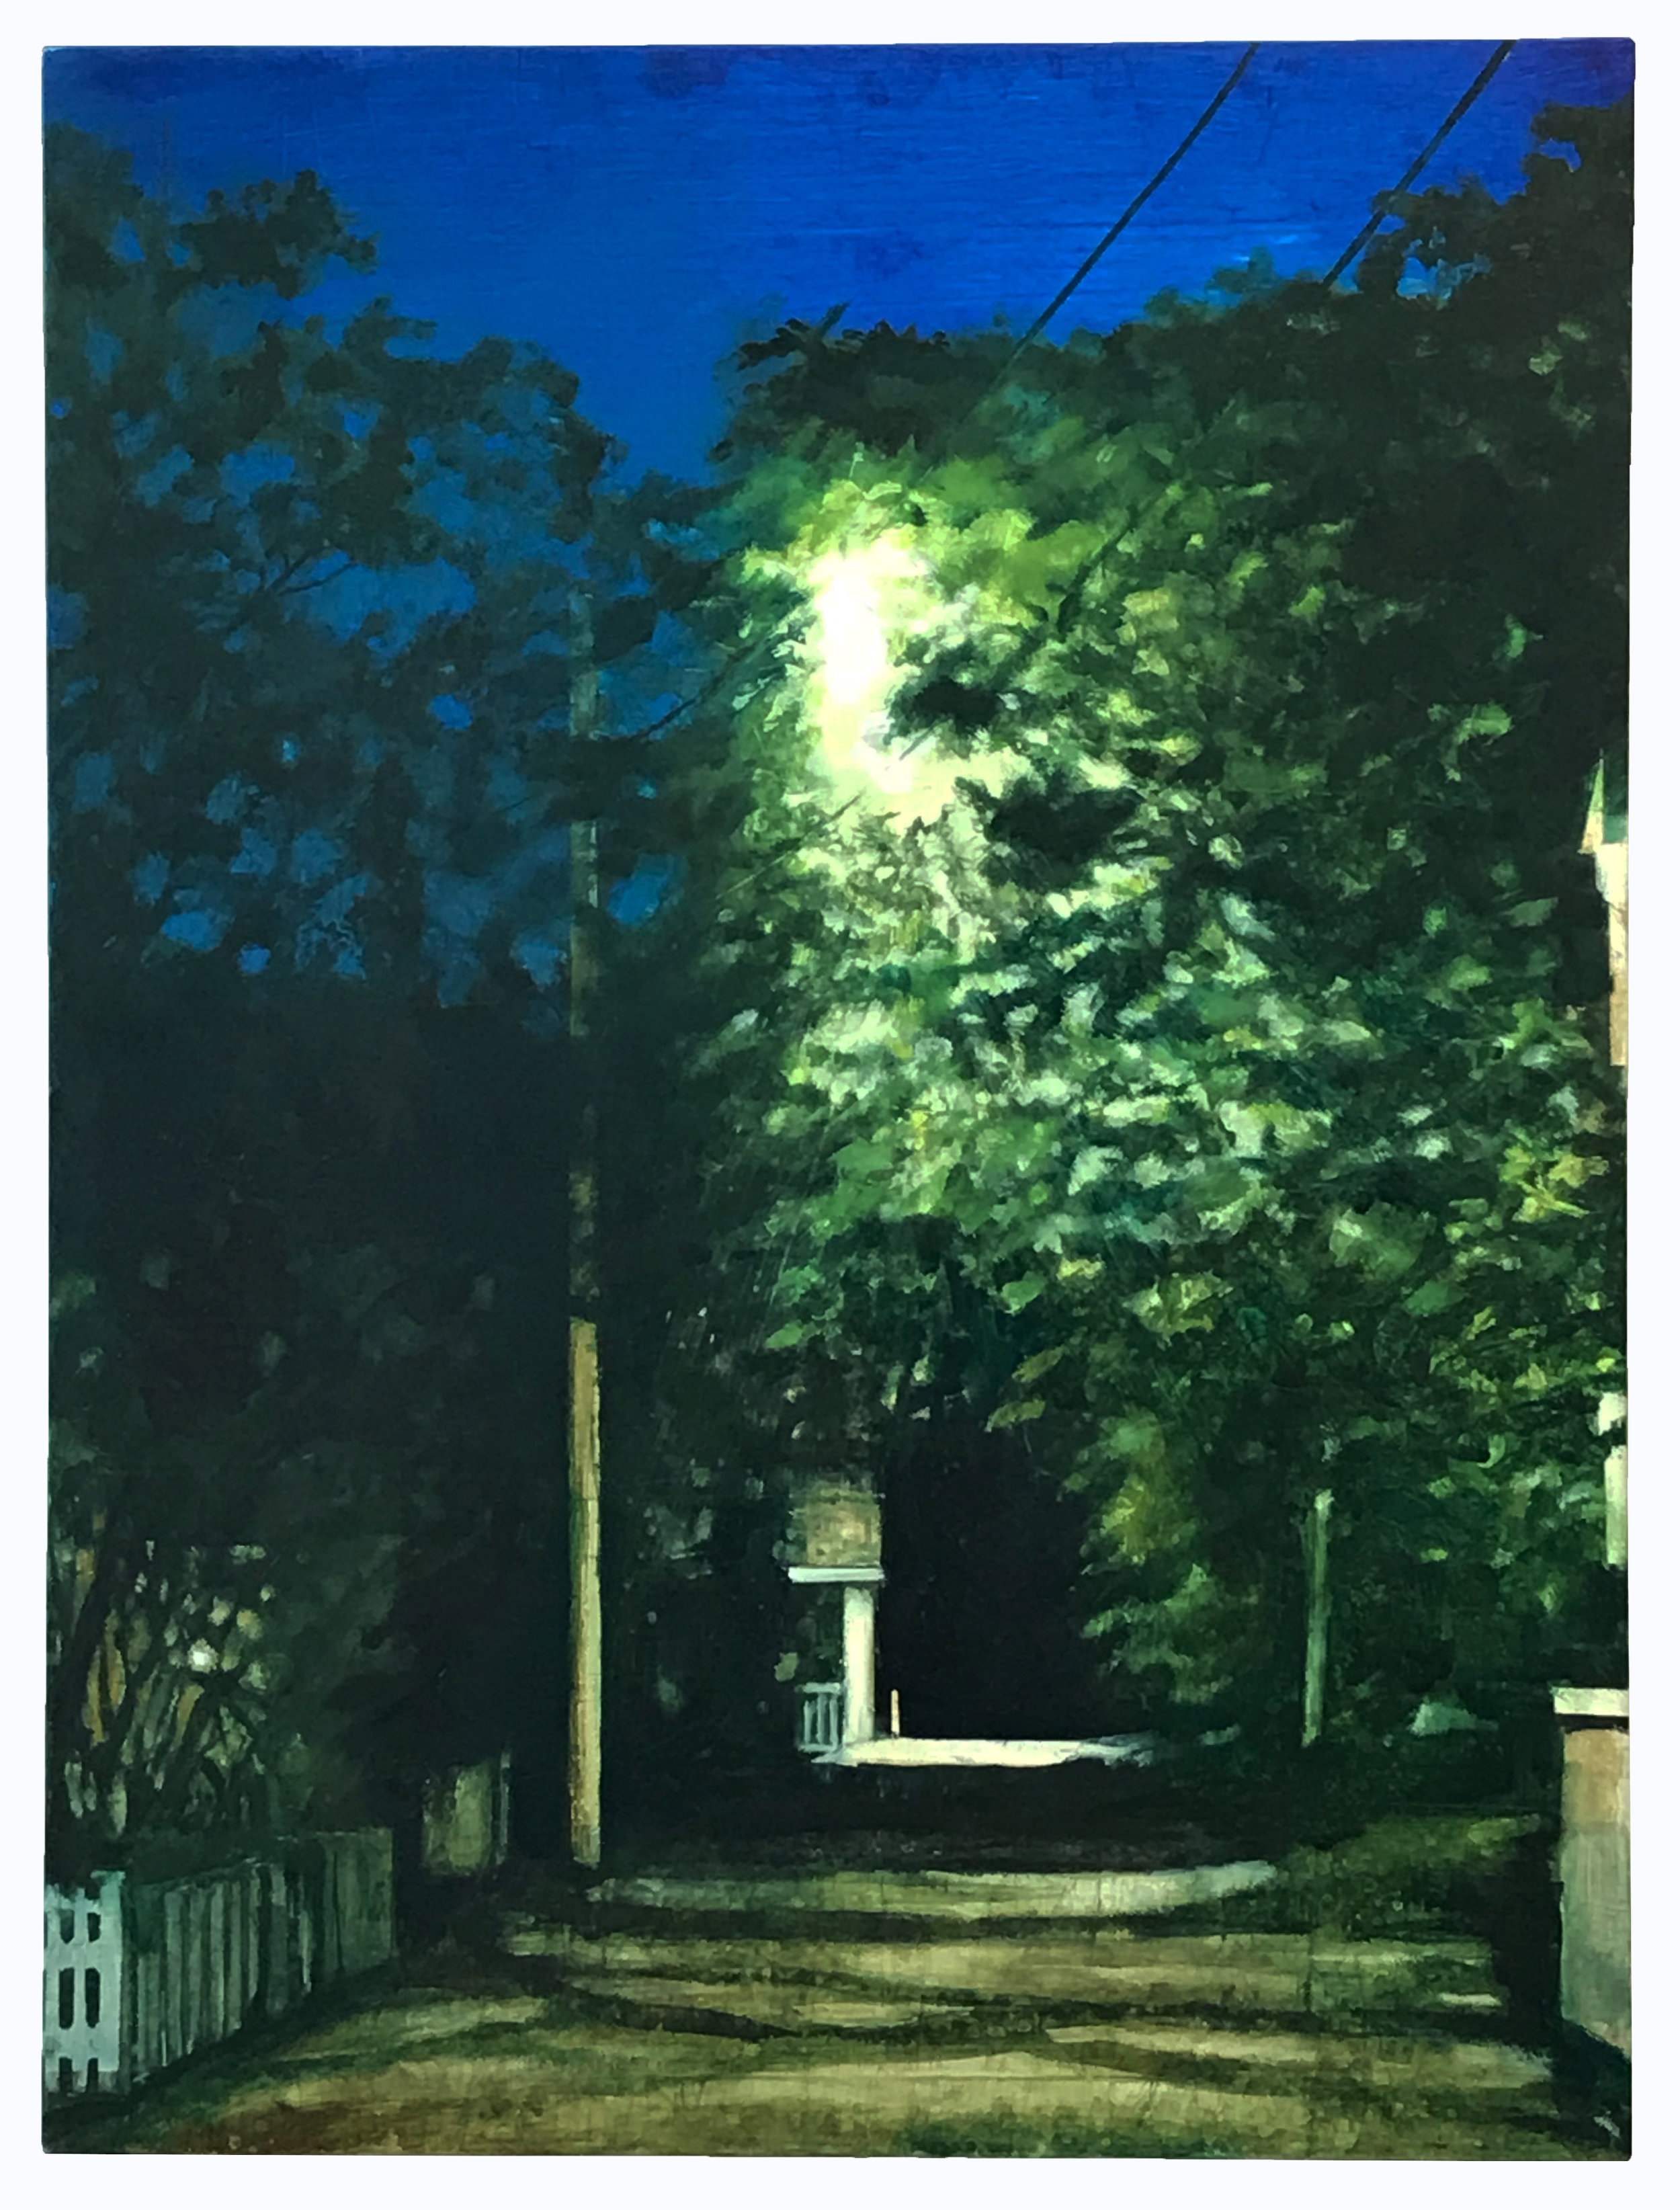  Anthony Street 40 x 30 inches Oil on linen 2019     